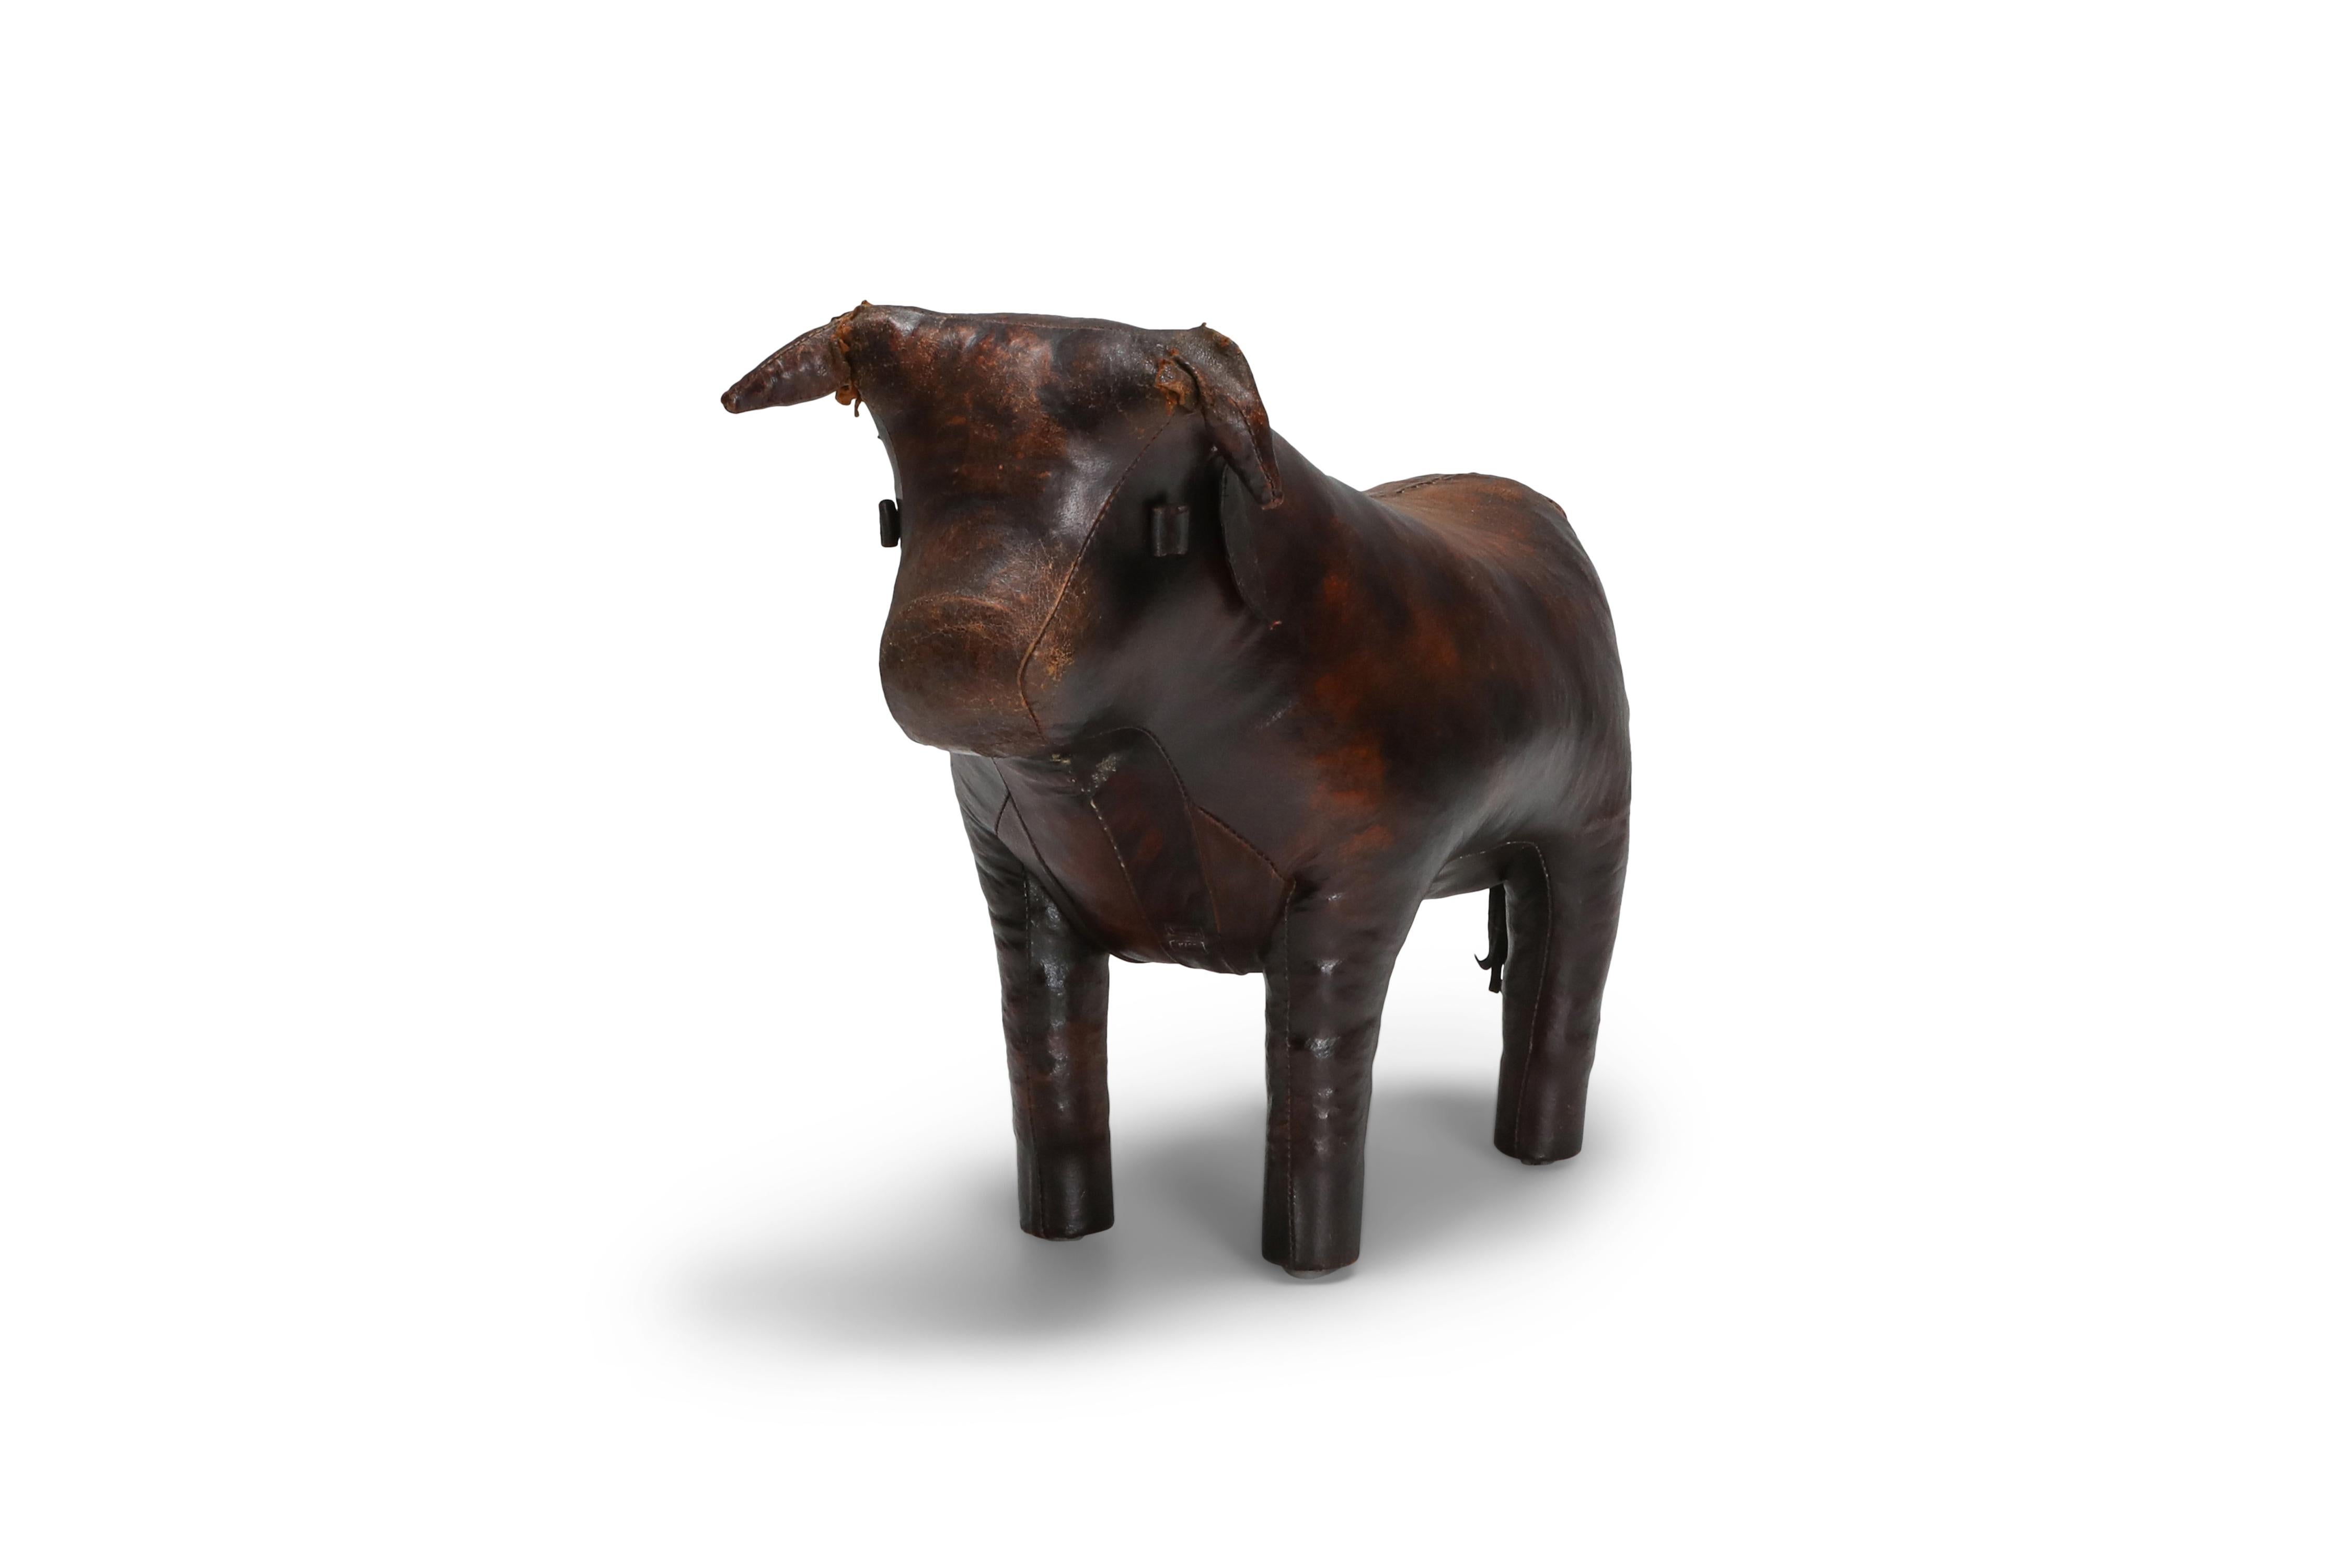 Dimitri Omersa, leather animal, foot stool, ottoman, UK, 1960s

Gorgeous patina on this original piece form the 1960s.